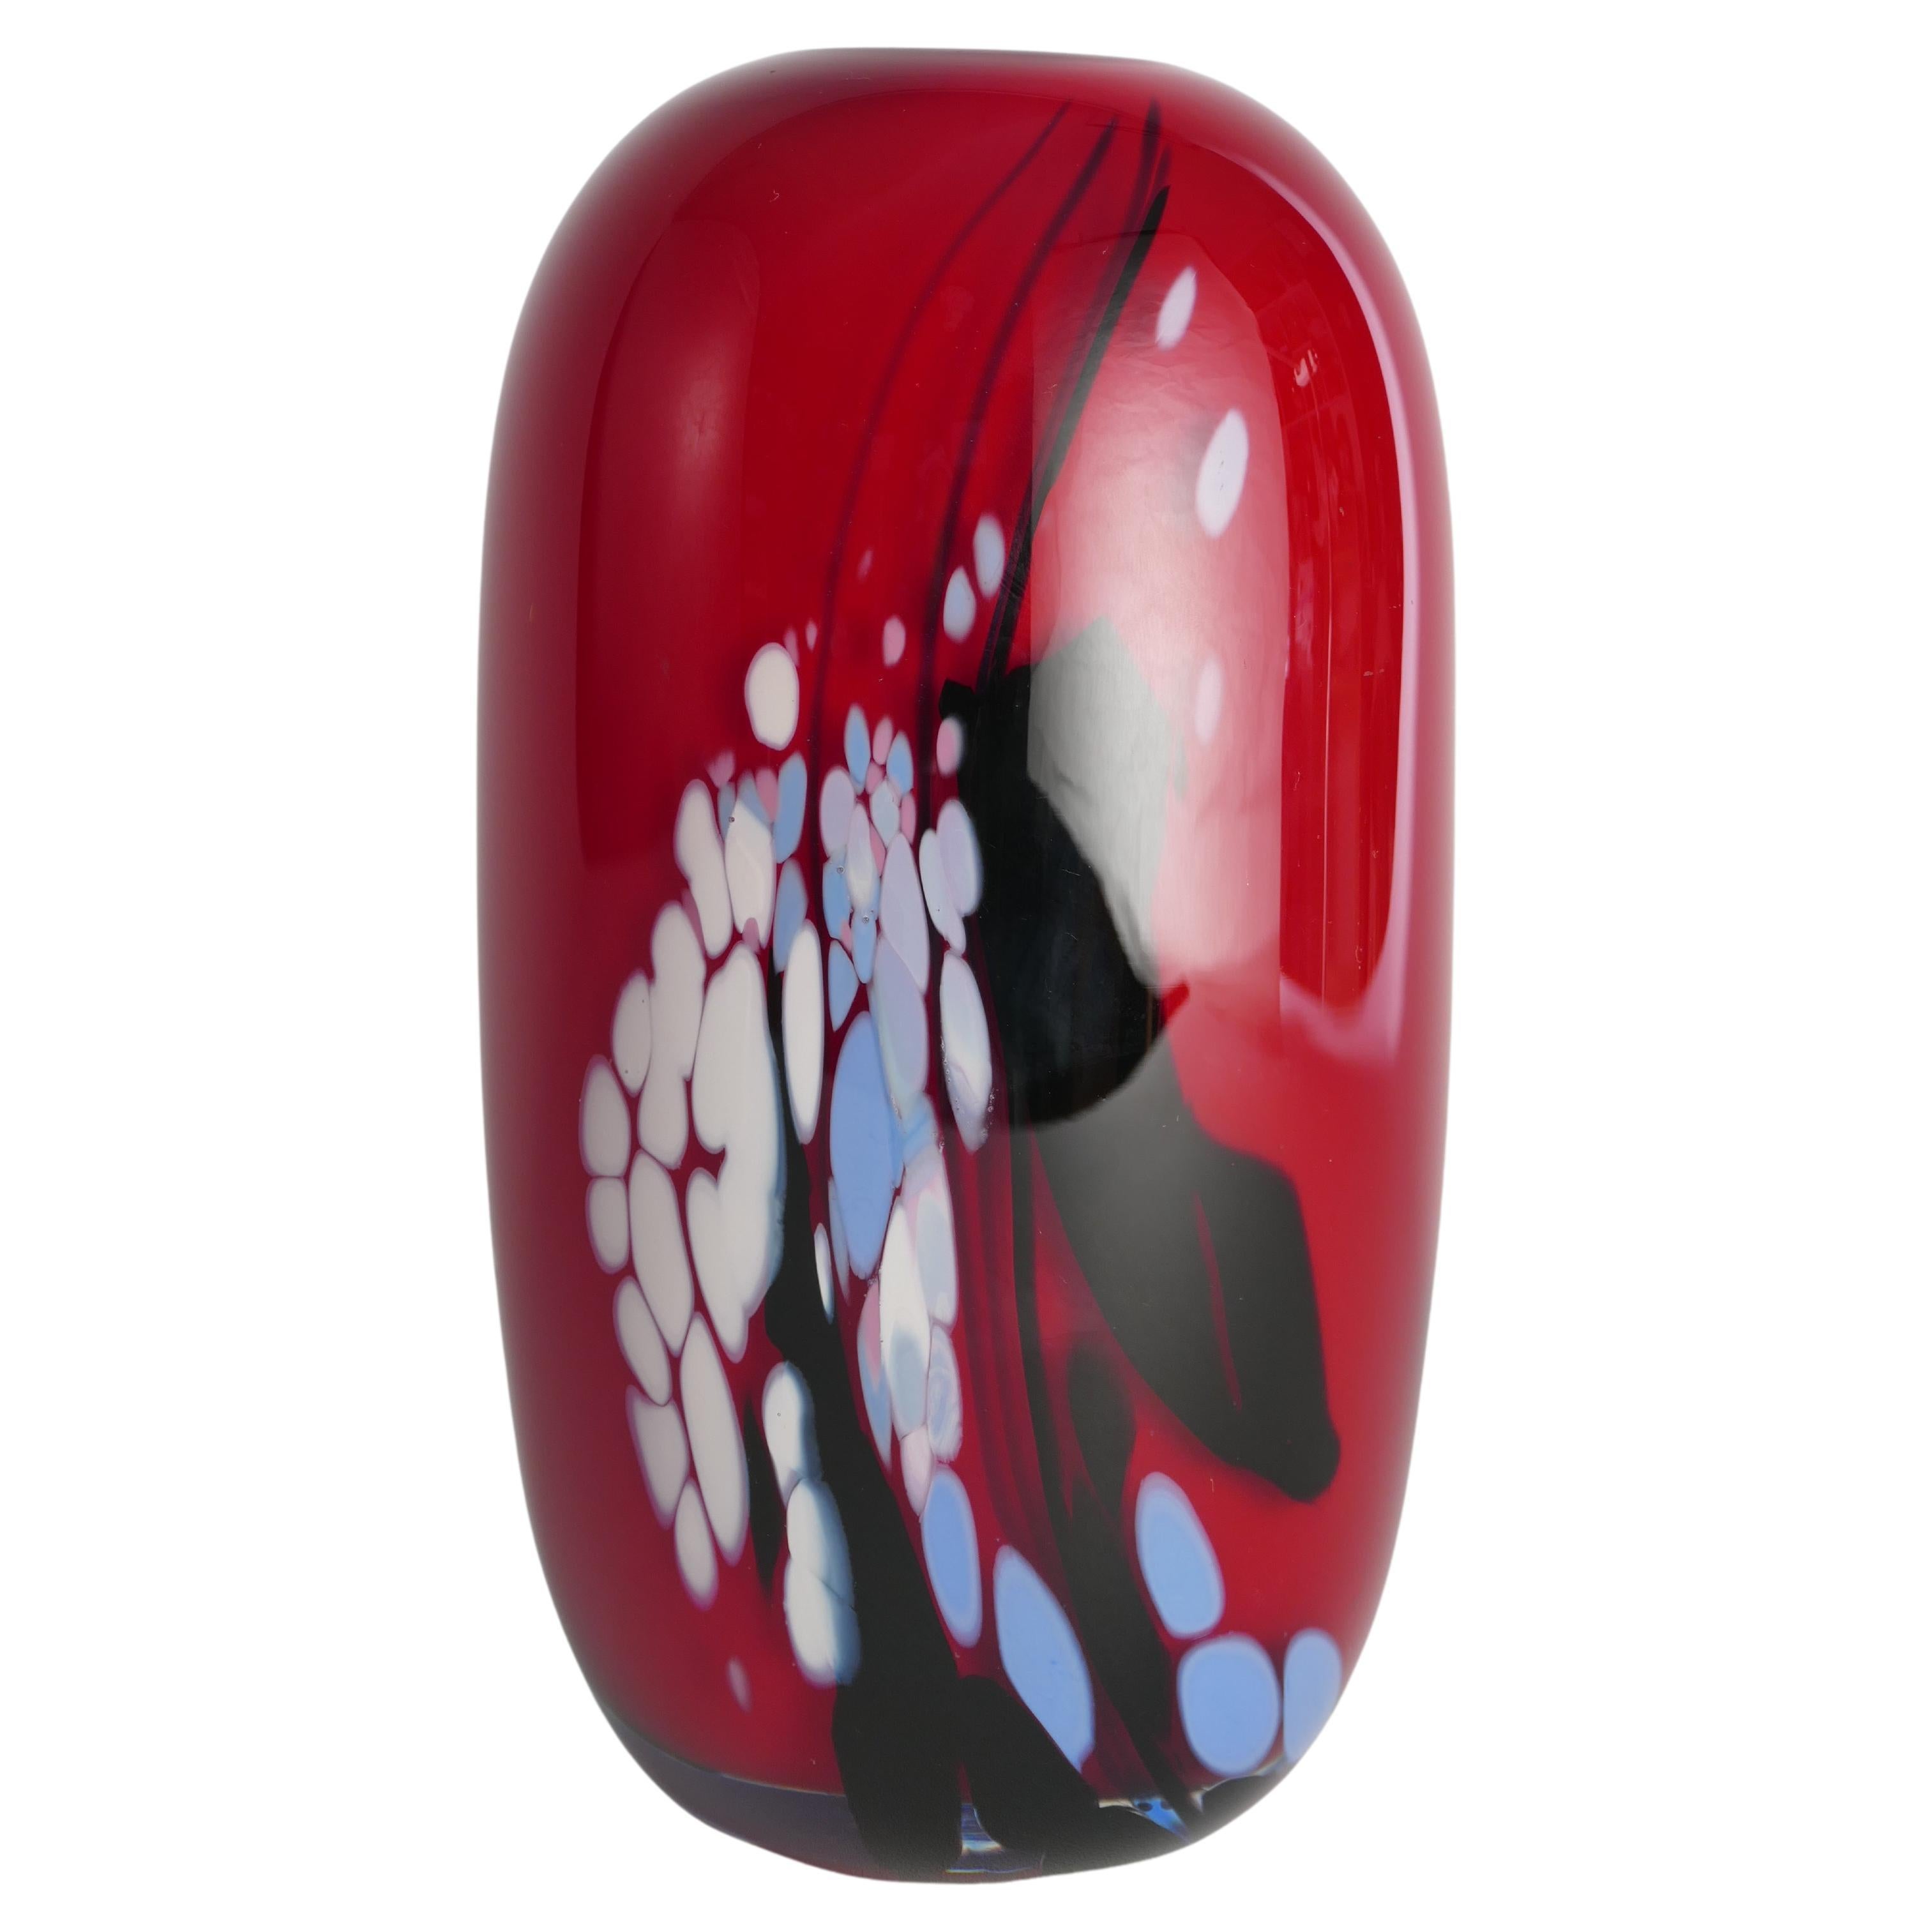 Unique Cherry Red Art Glass Vase by Mikael Axenbrant, Sweden 1990 For Sale